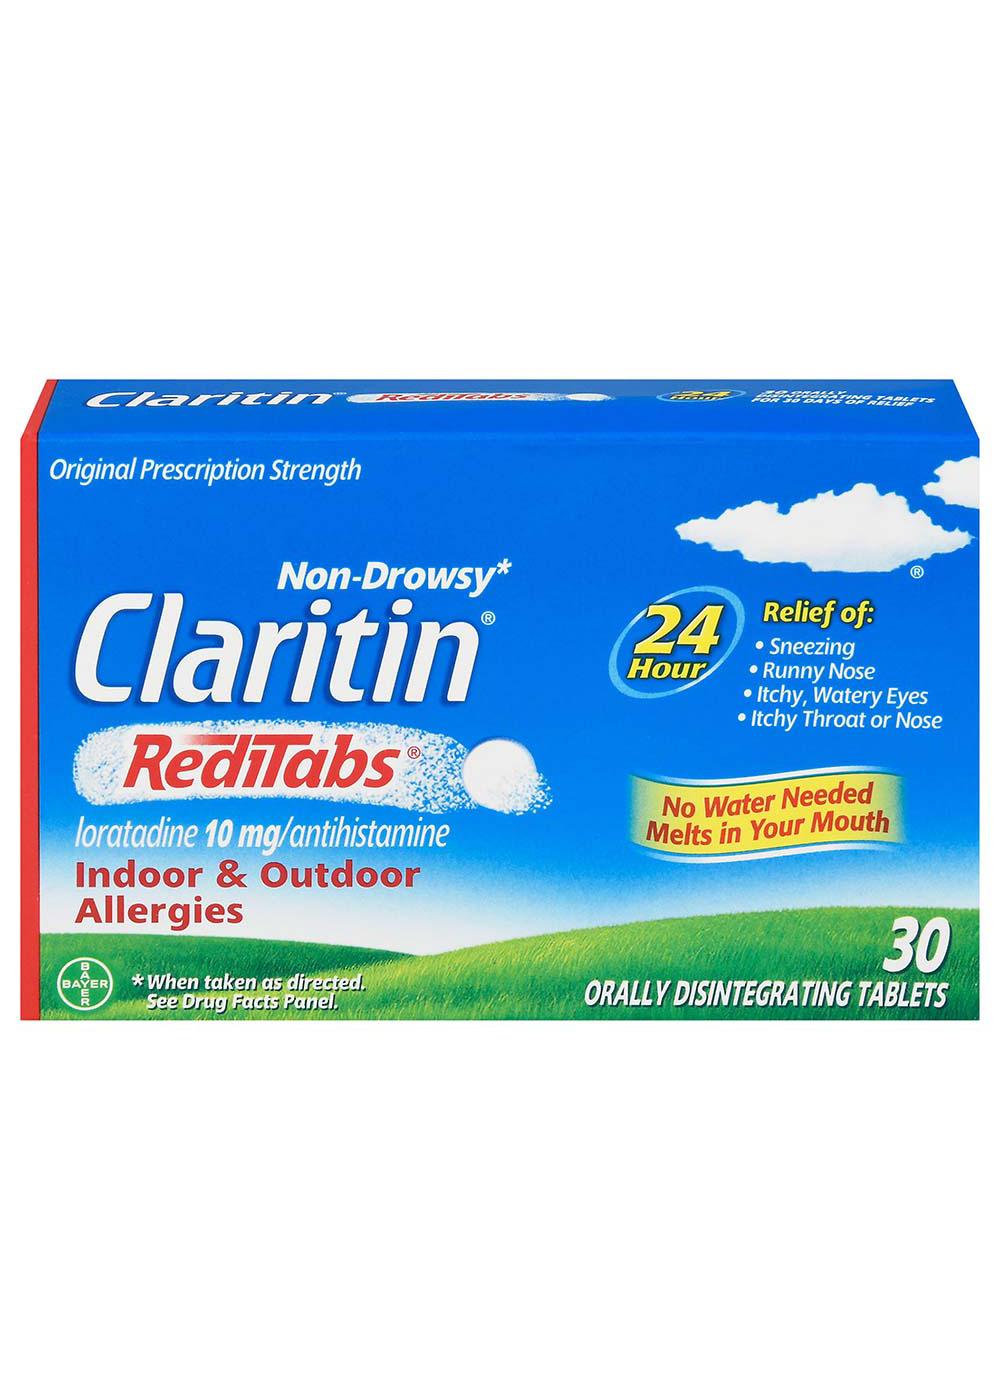 Claritin RediTabs 24 Hour Allergy Relief Tablets; image 1 of 2